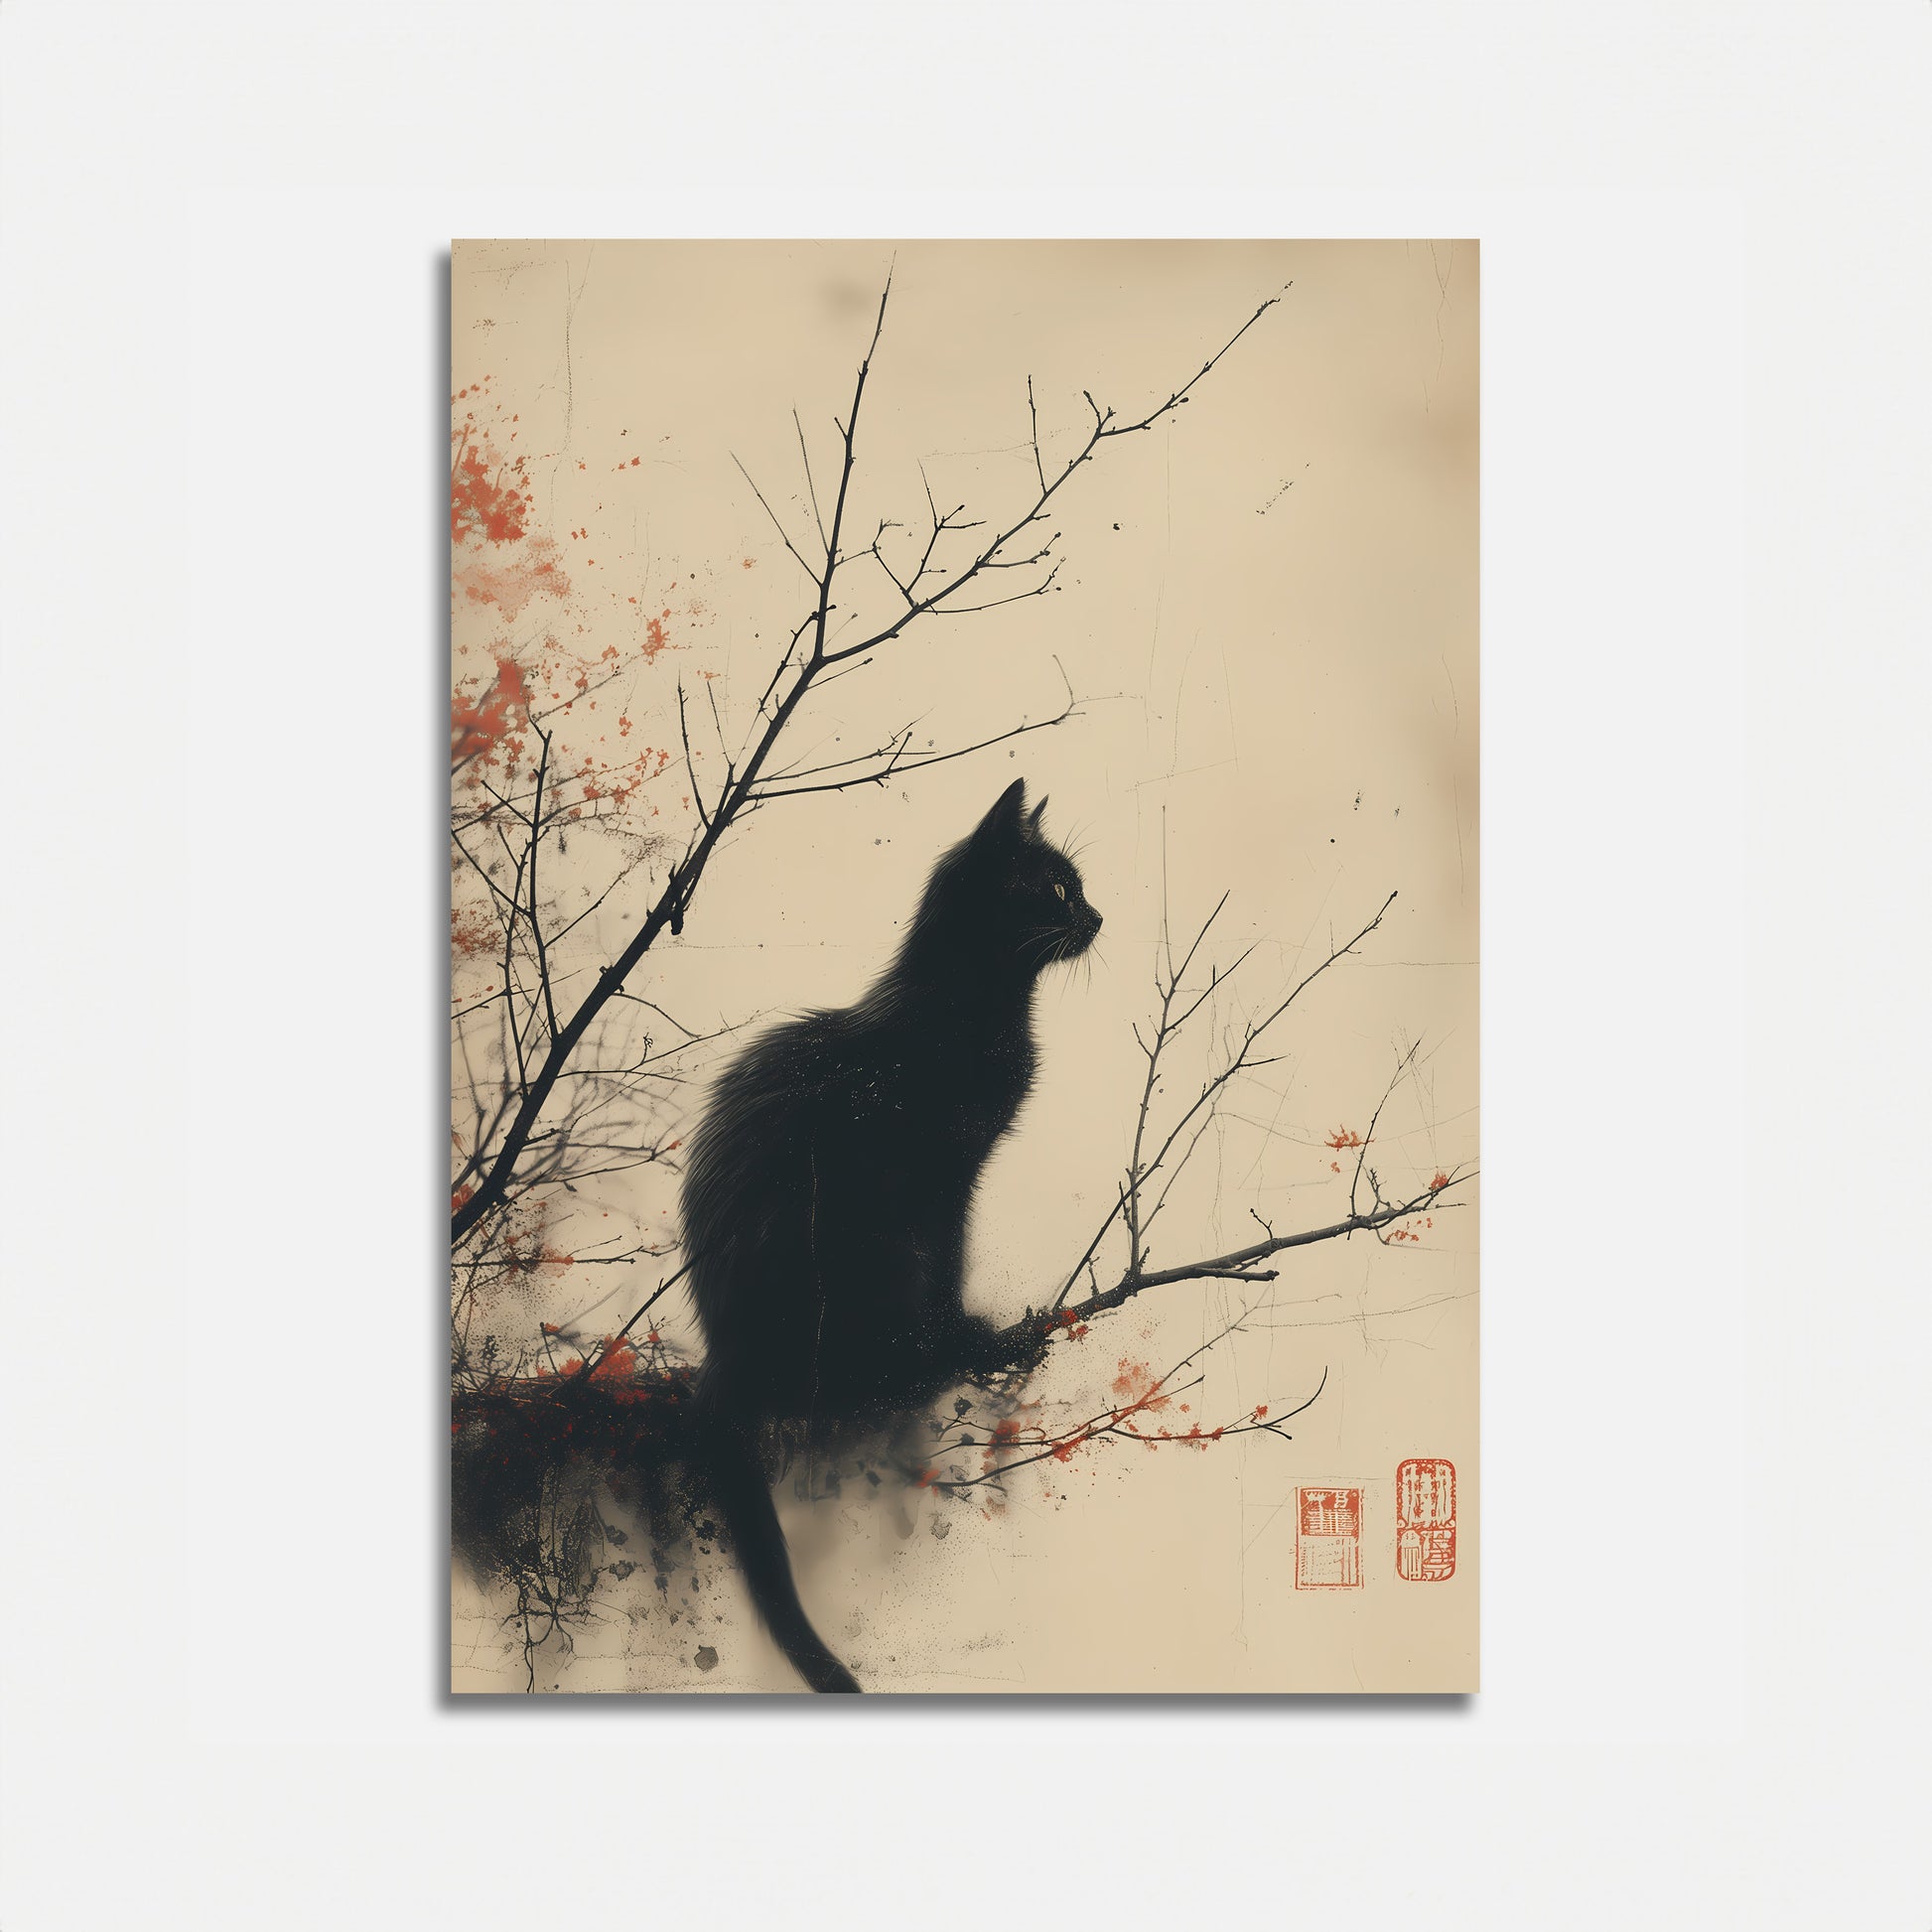 A silhouette of a cat on a branch with red foliage, Asian-style artwork.